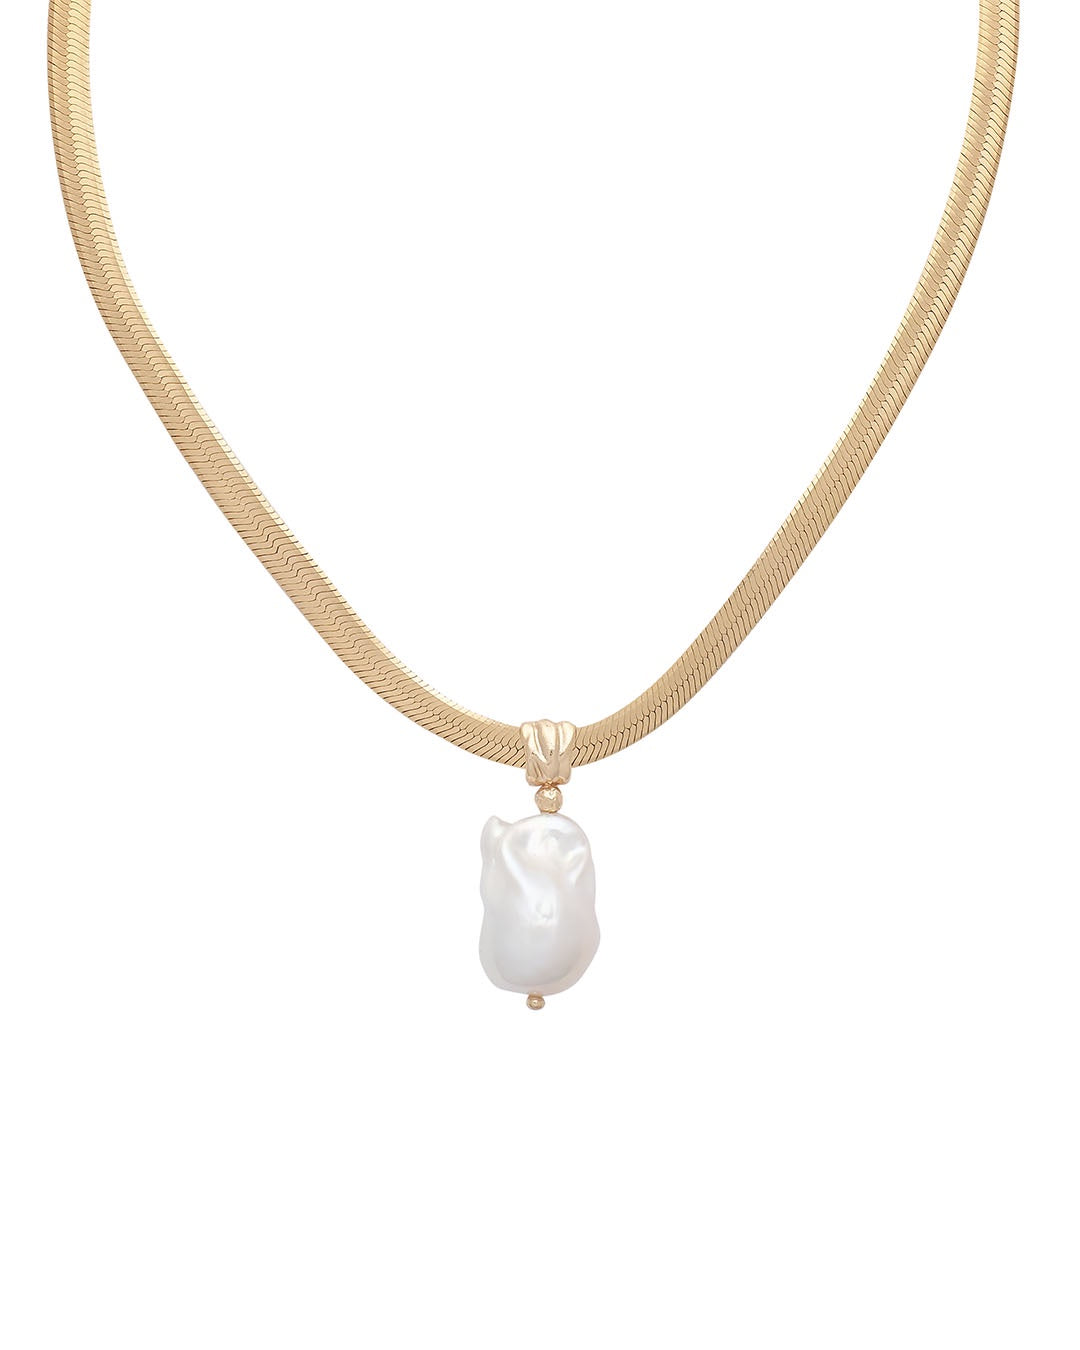 Siren Pearl Pendant Necklace Necklaces by YCL Jewels - Prae Store